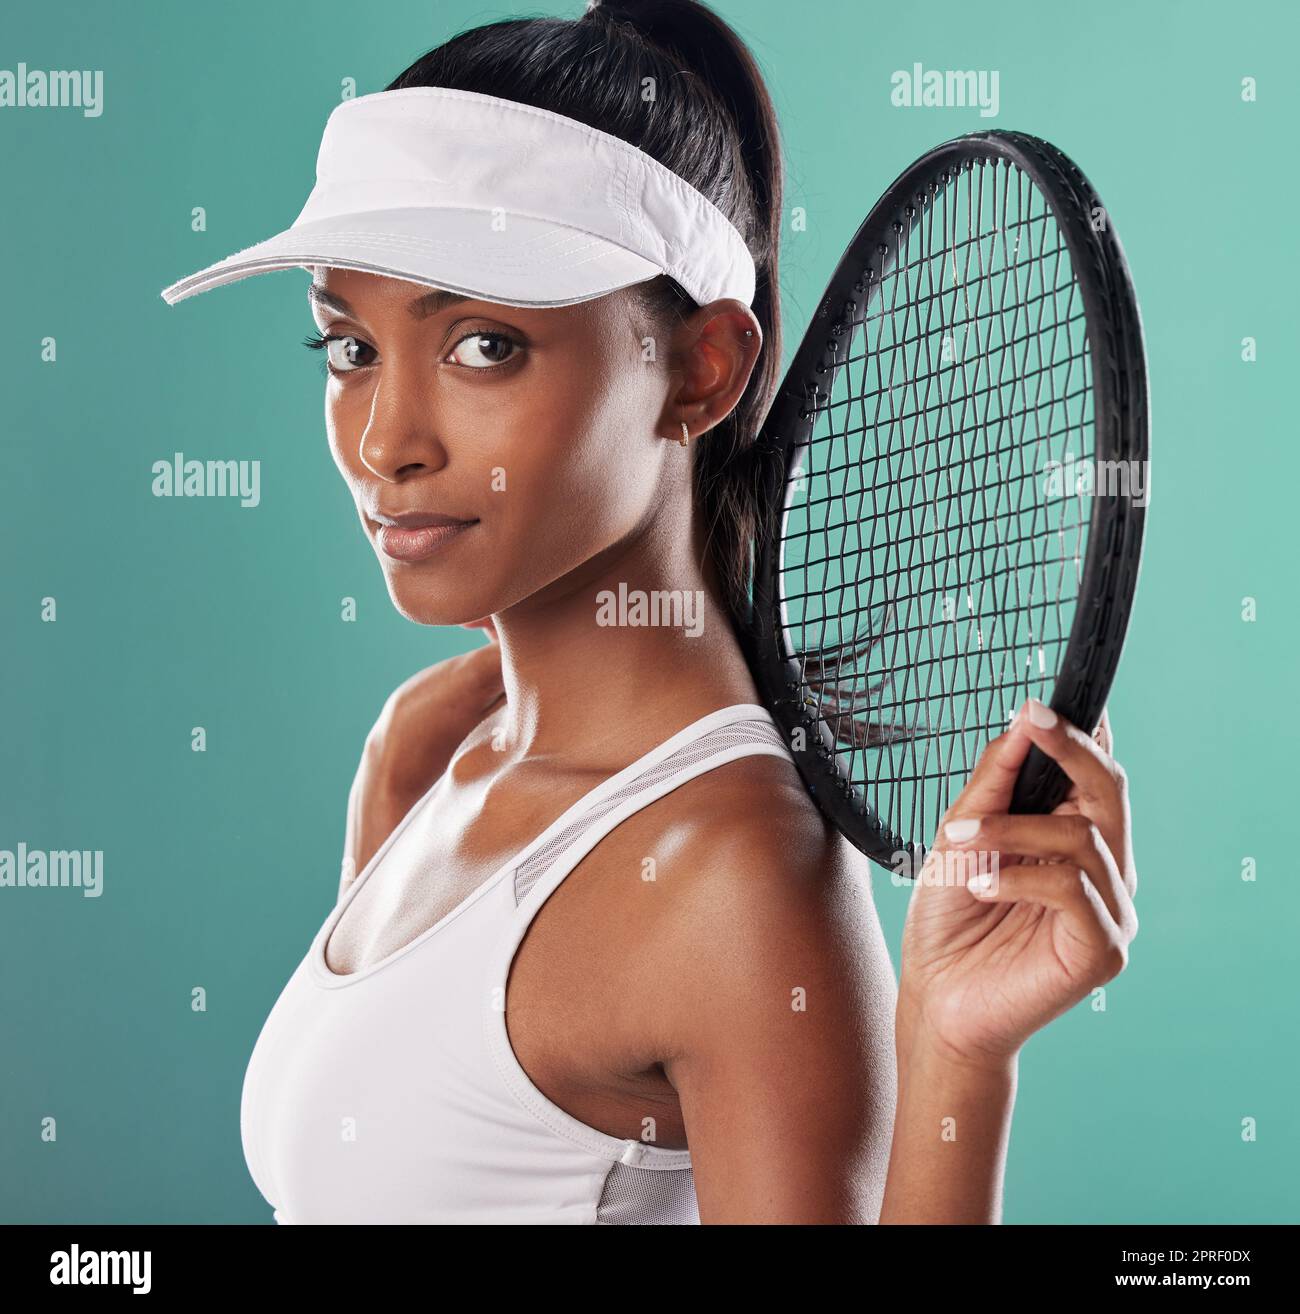 Determined, motivated woman tennis player, athlete and sports person. Portrait of a competitive, healthy and serious girl with female empowerment and motivation ready for fitness training Stock Photo